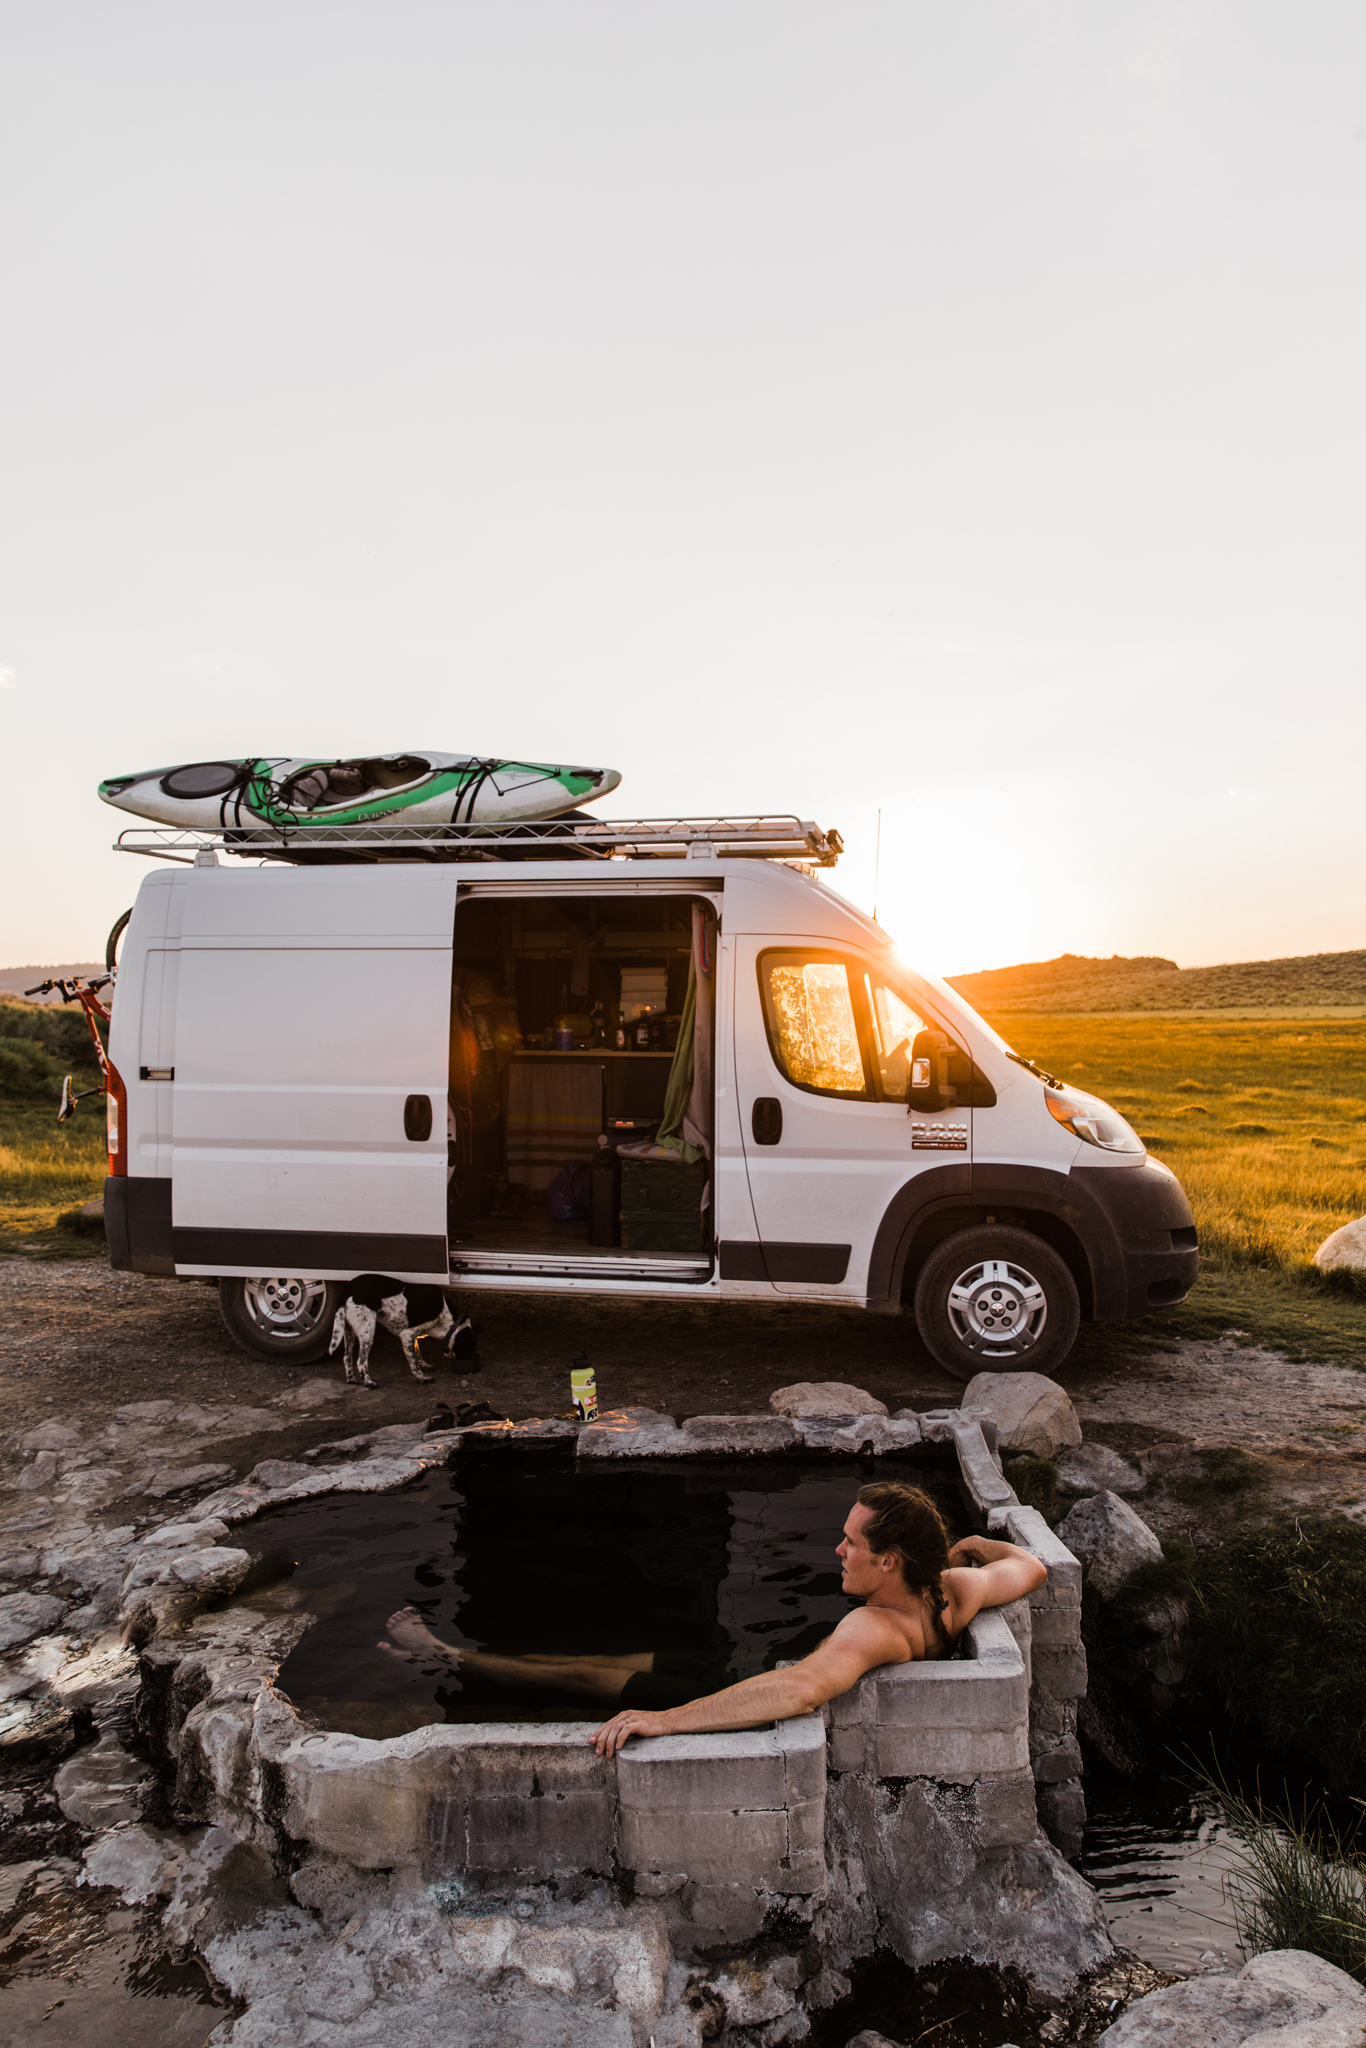 hot springs and van life | utah and california adventure elopement photographers | the hearnes adventure photography | www.thehearnes.com